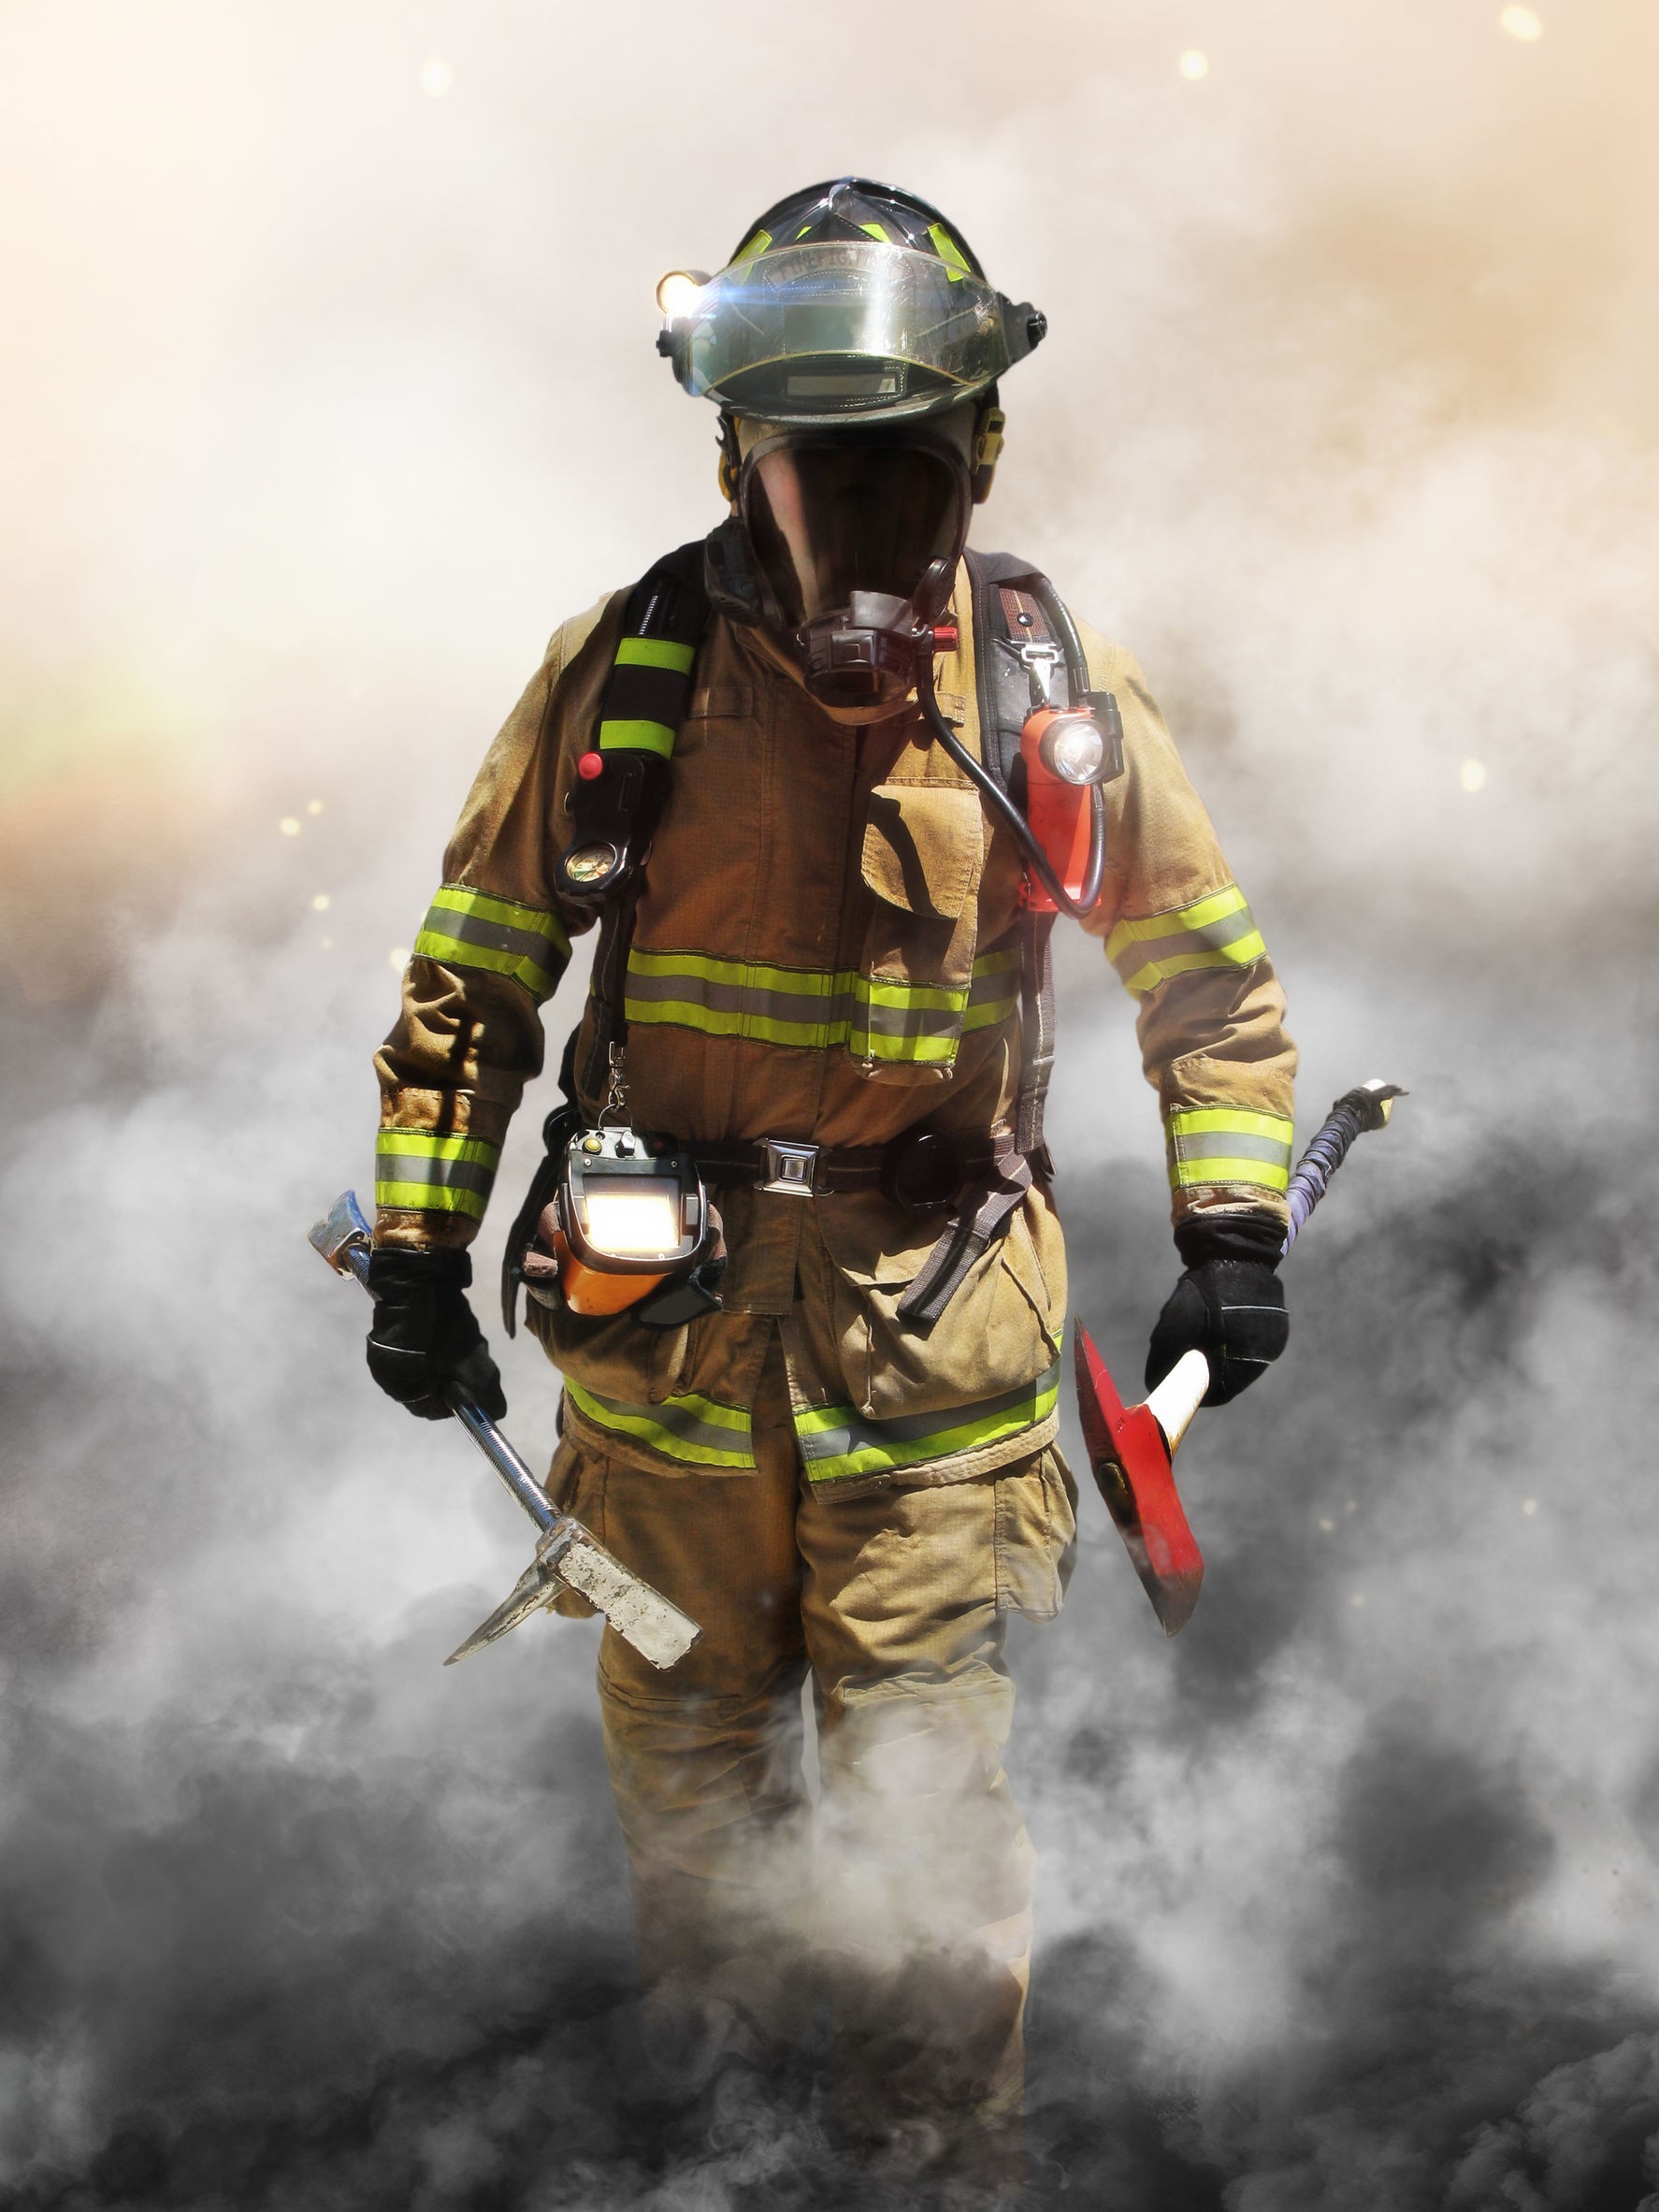 Iphone Firefighter Wallpapers